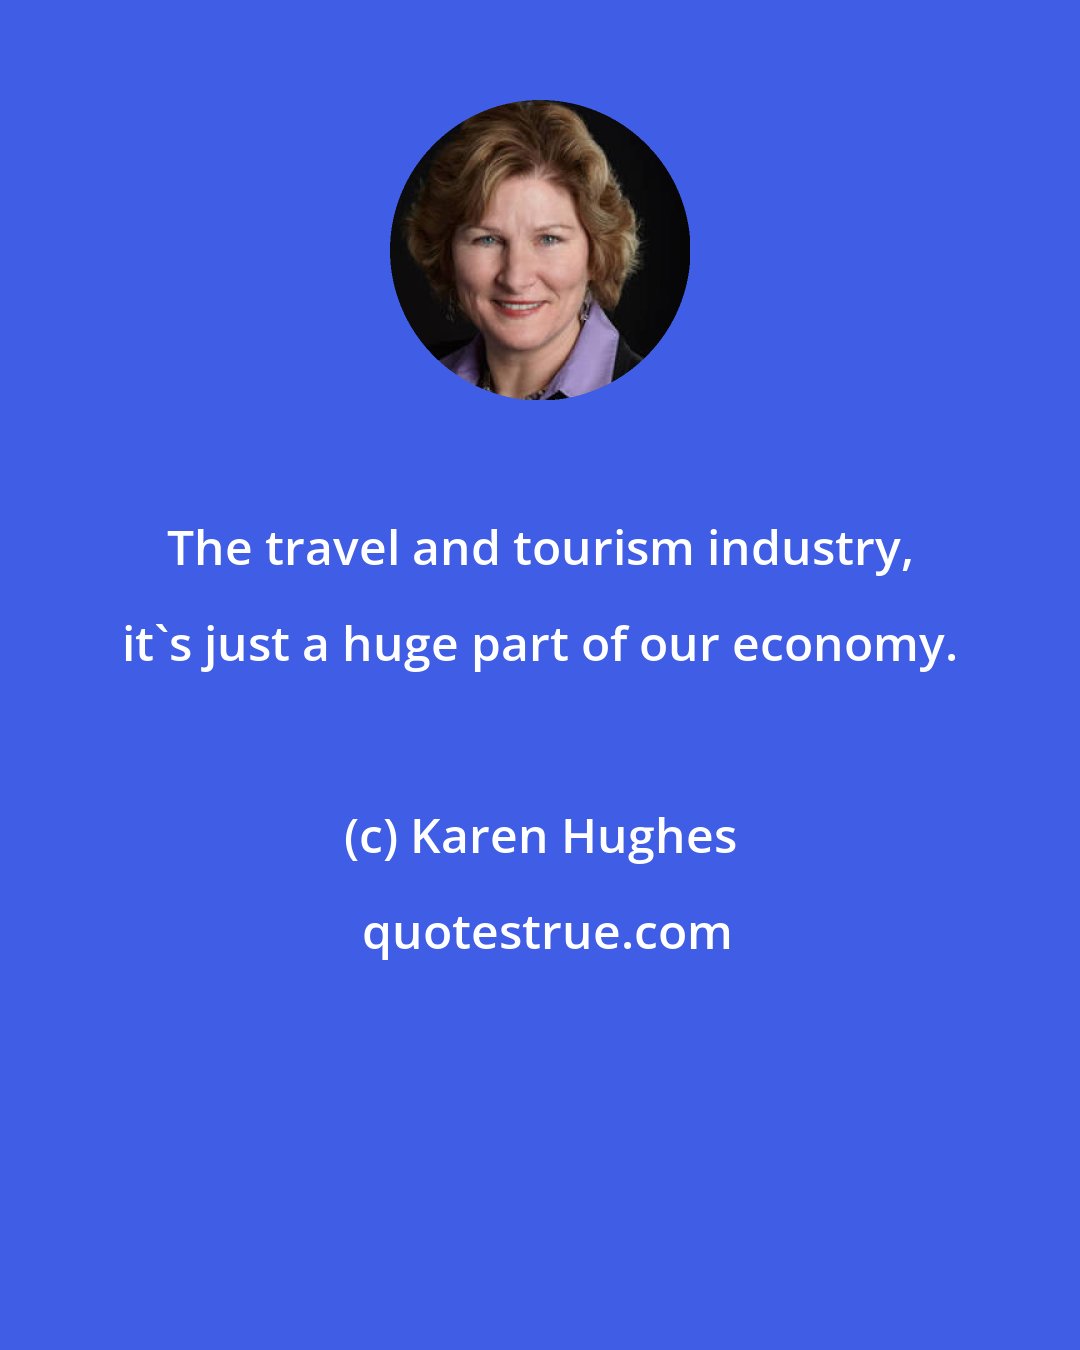 Karen Hughes: The travel and tourism industry, it's just a huge part of our economy.